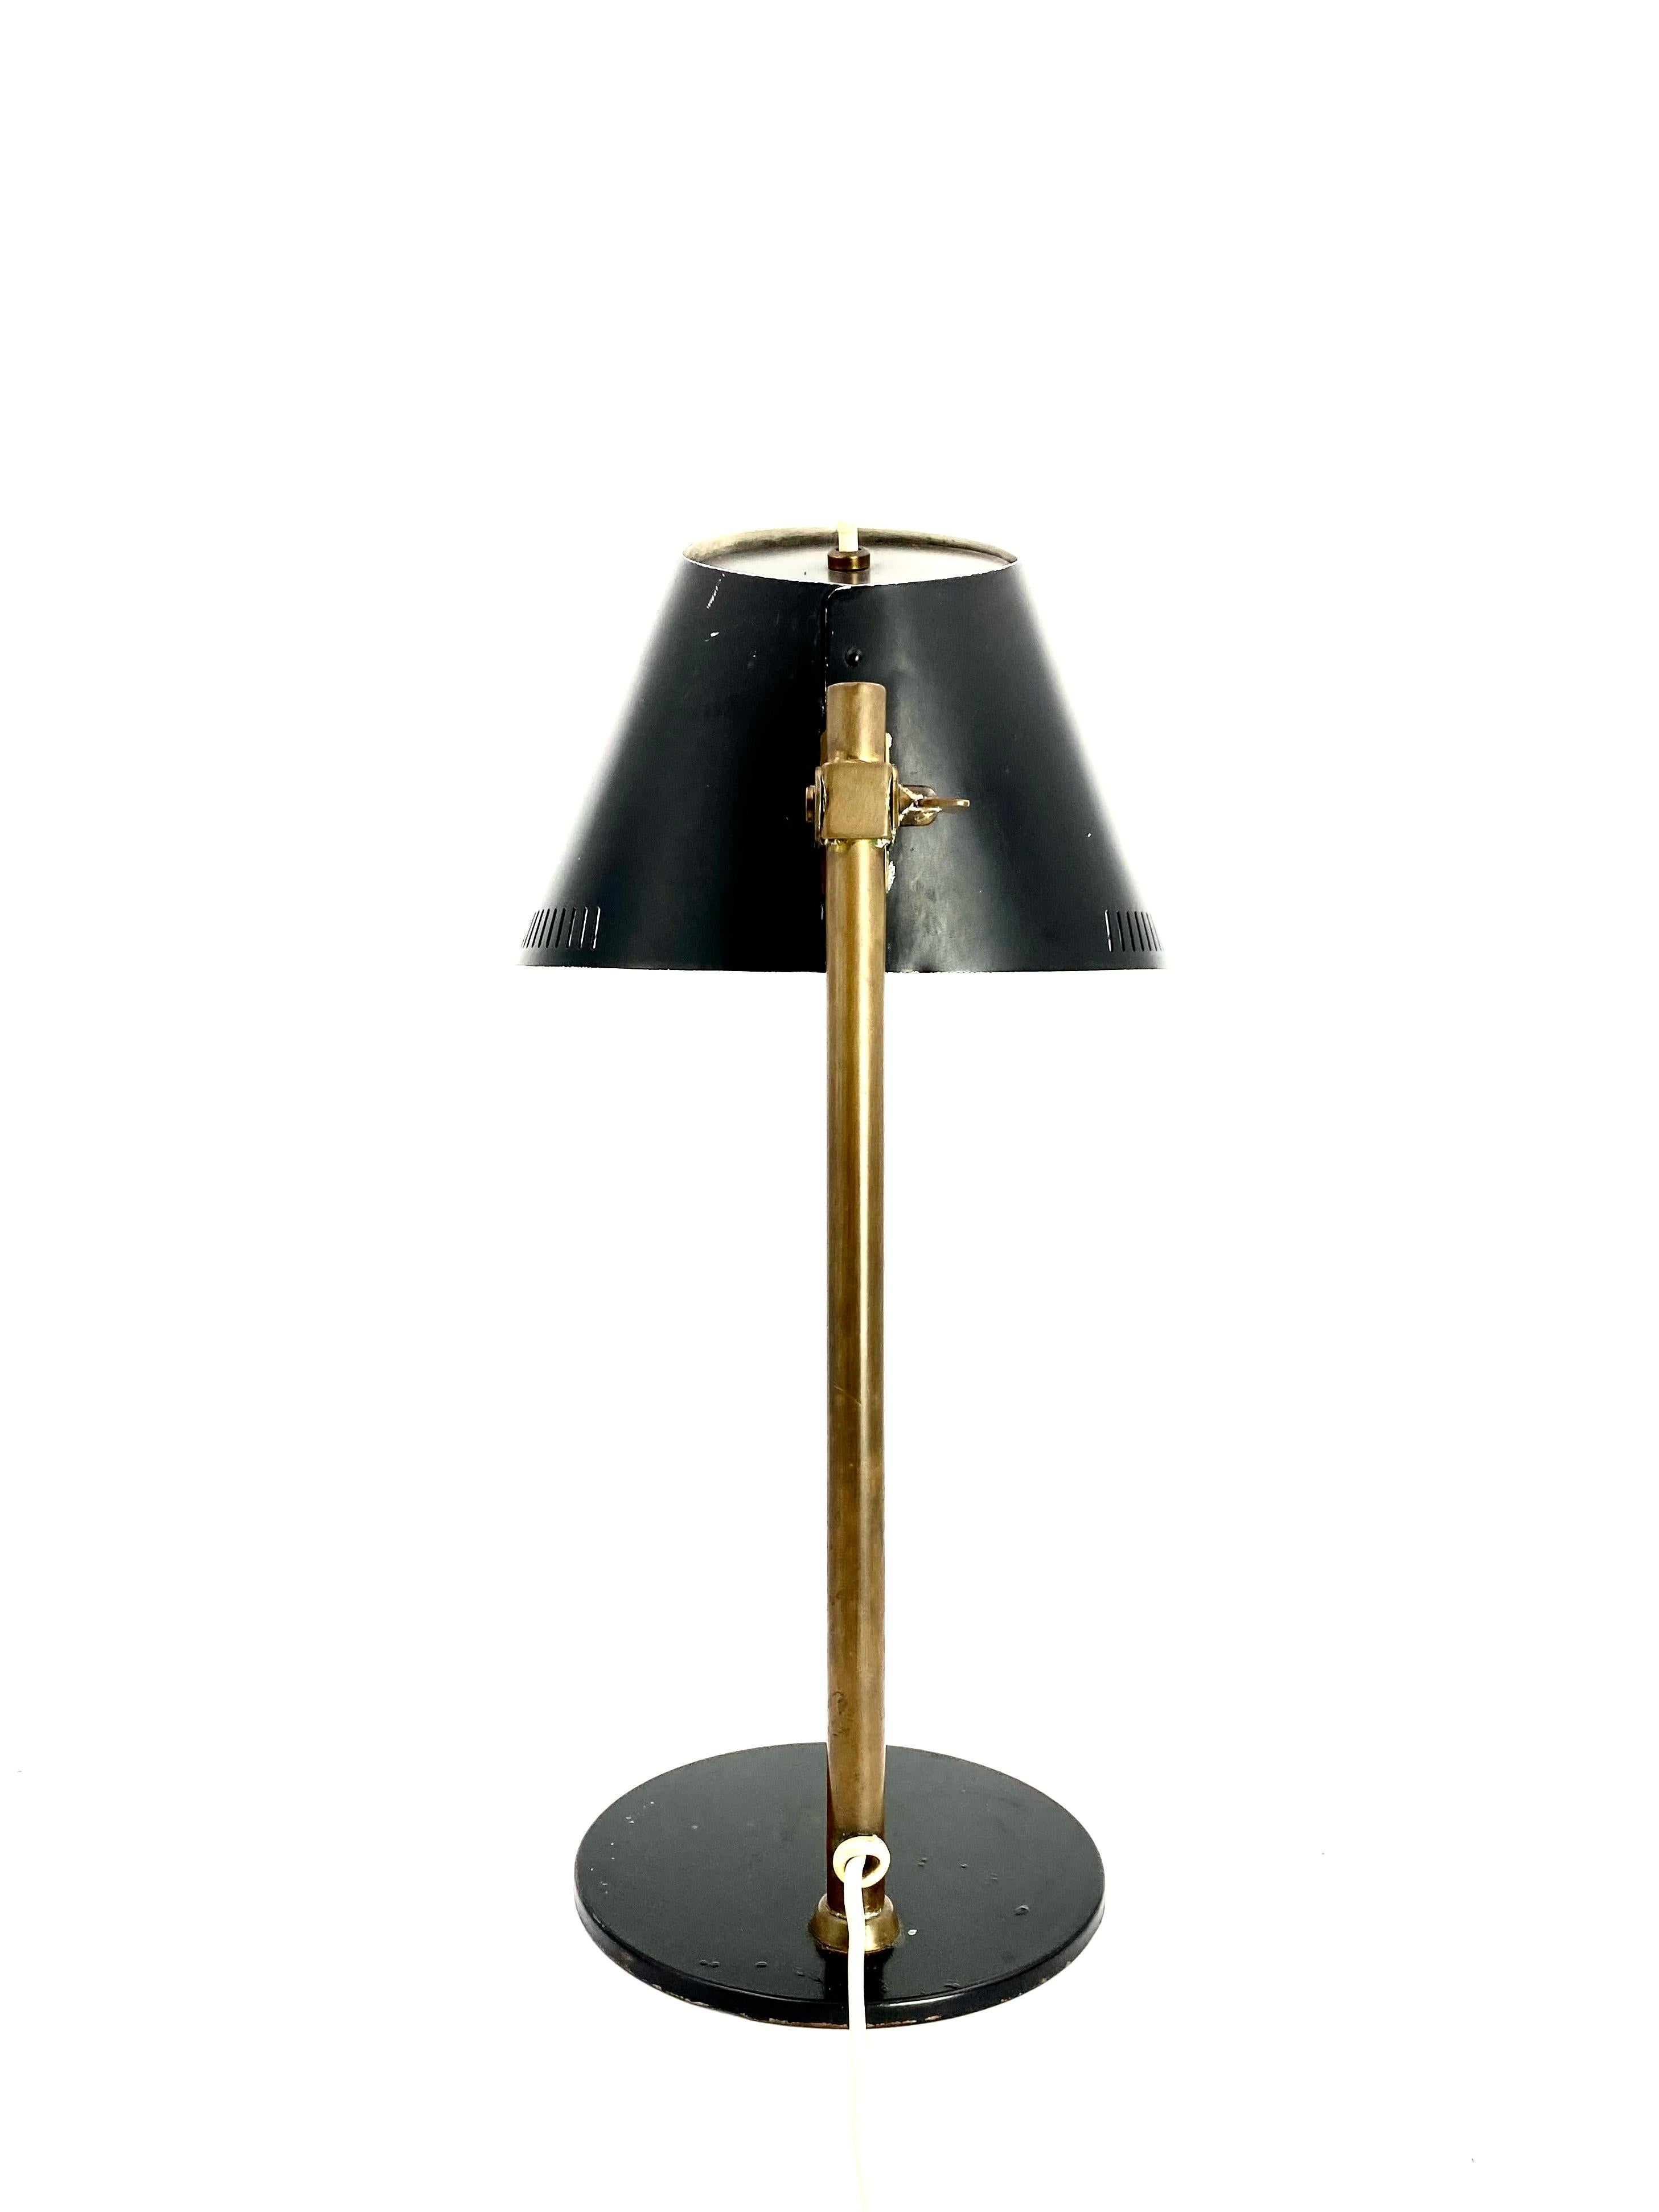 Paavo Tynell Rare Table Lamp Mod. 9227, by Taito E Idman, Finland, 1958 For Sale 3